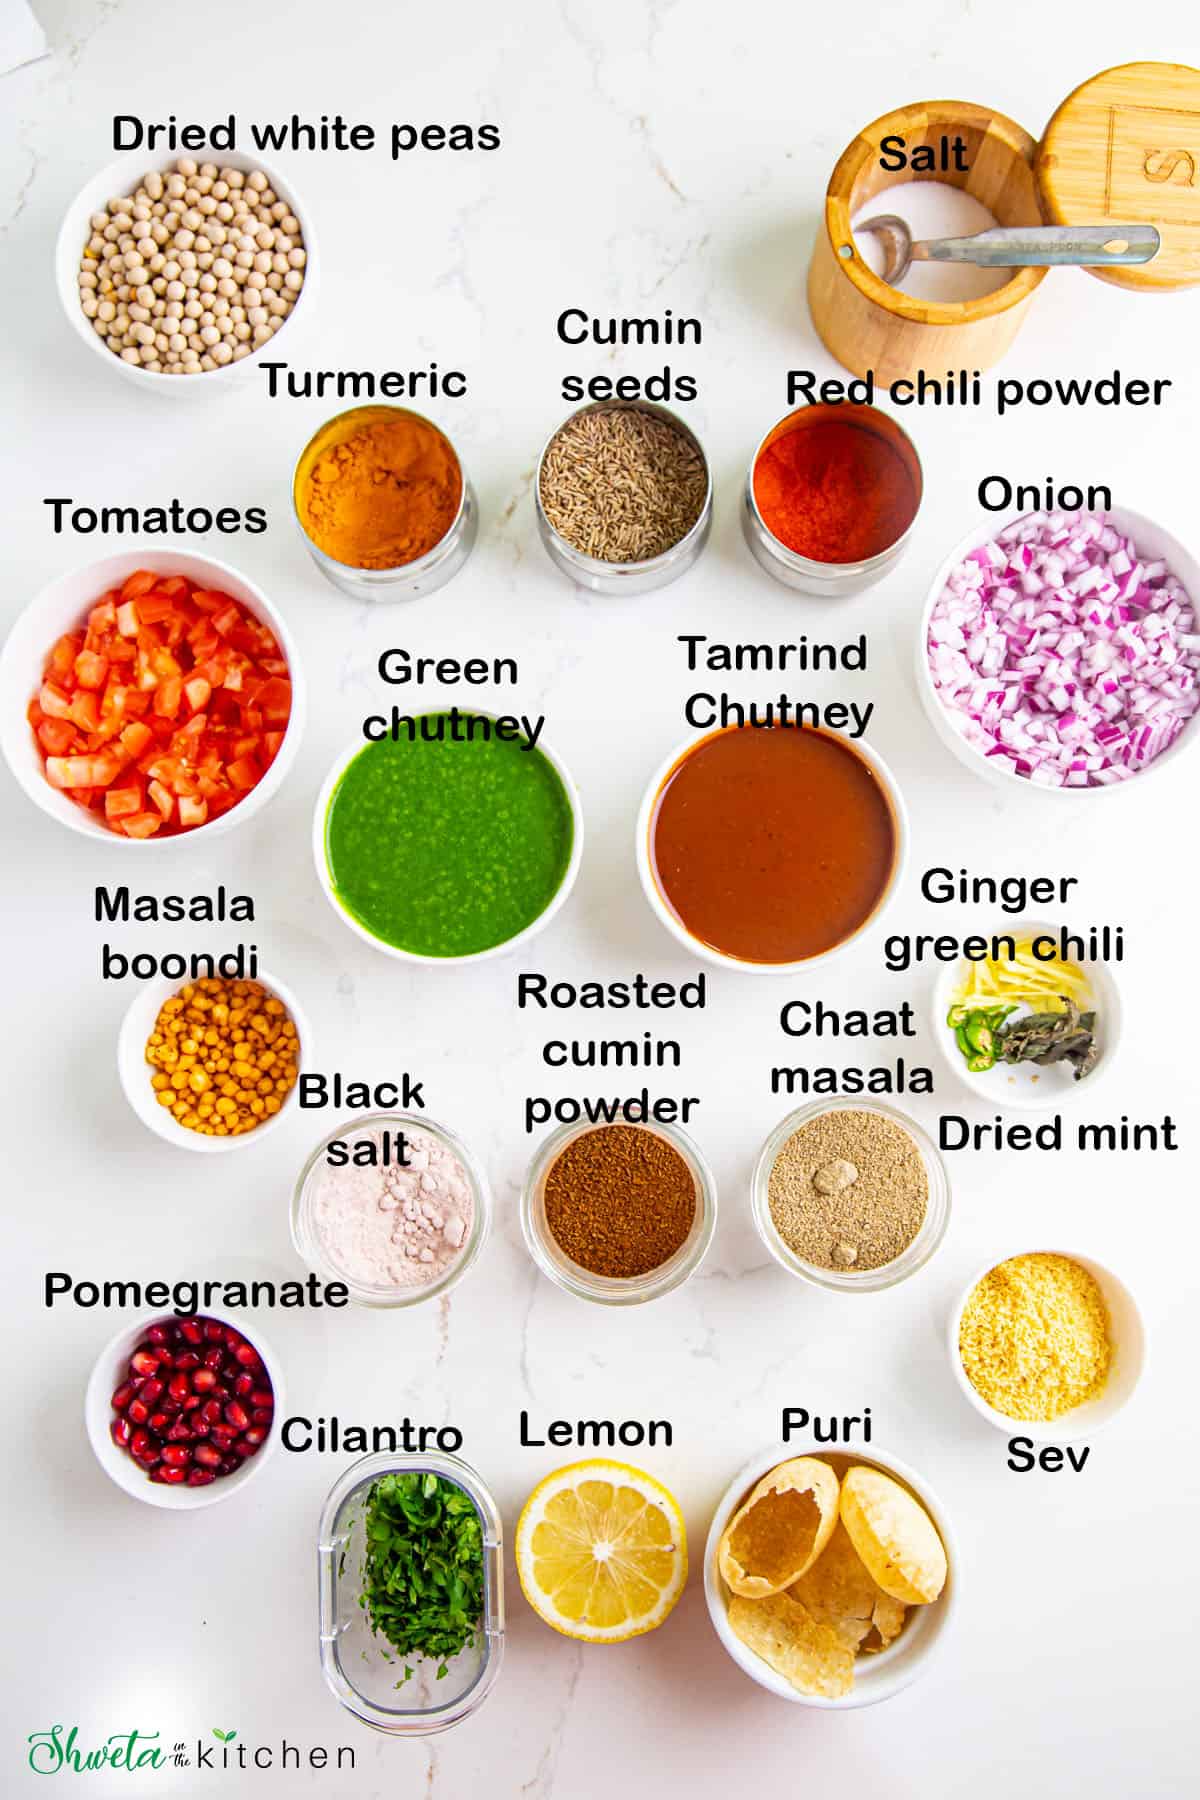 Ingredients for Ragda chaat placed in bowls on white surface